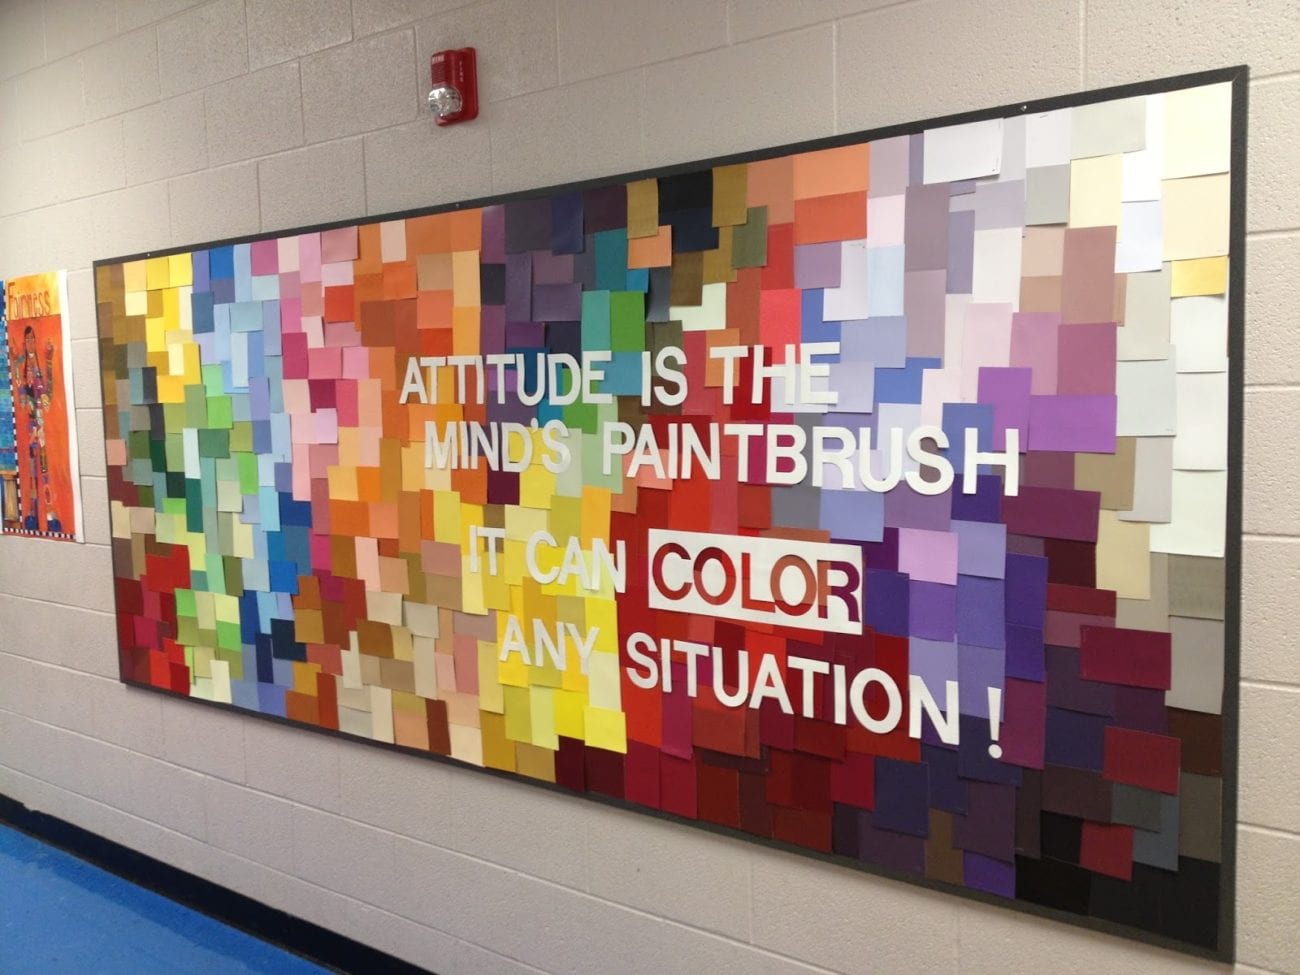 Rainbow bulletin board using paint swatches. The board says "Attitude is the mind's paintbrush."